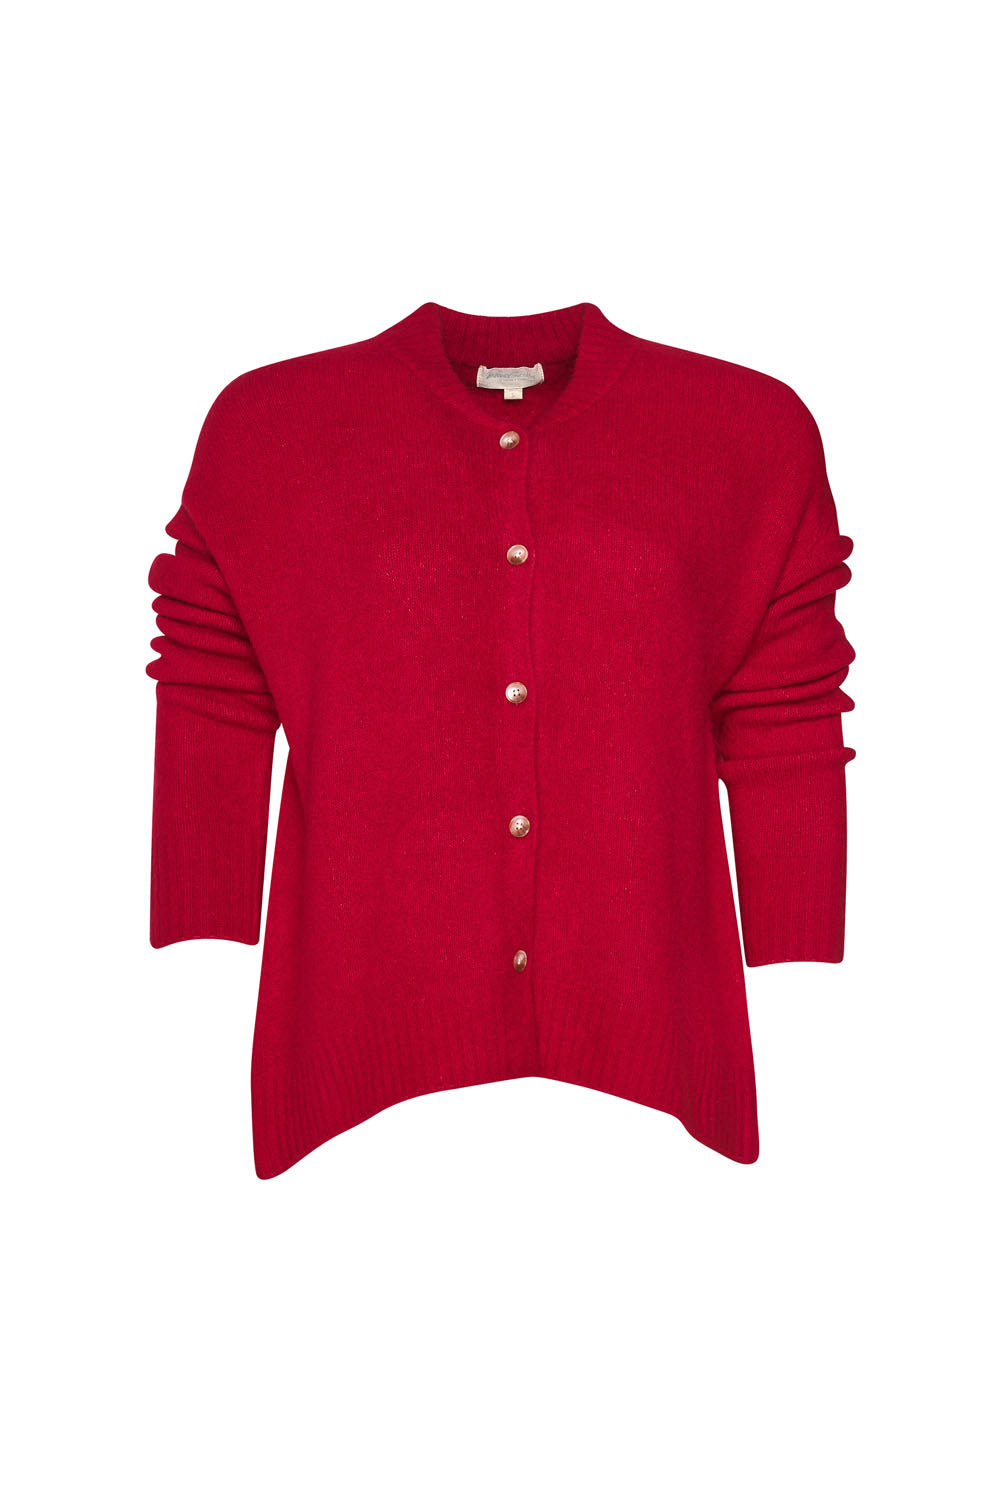 MADLY SWEETLY DOWNY JR CARDI - SCARLET - THE VOGUE STORE